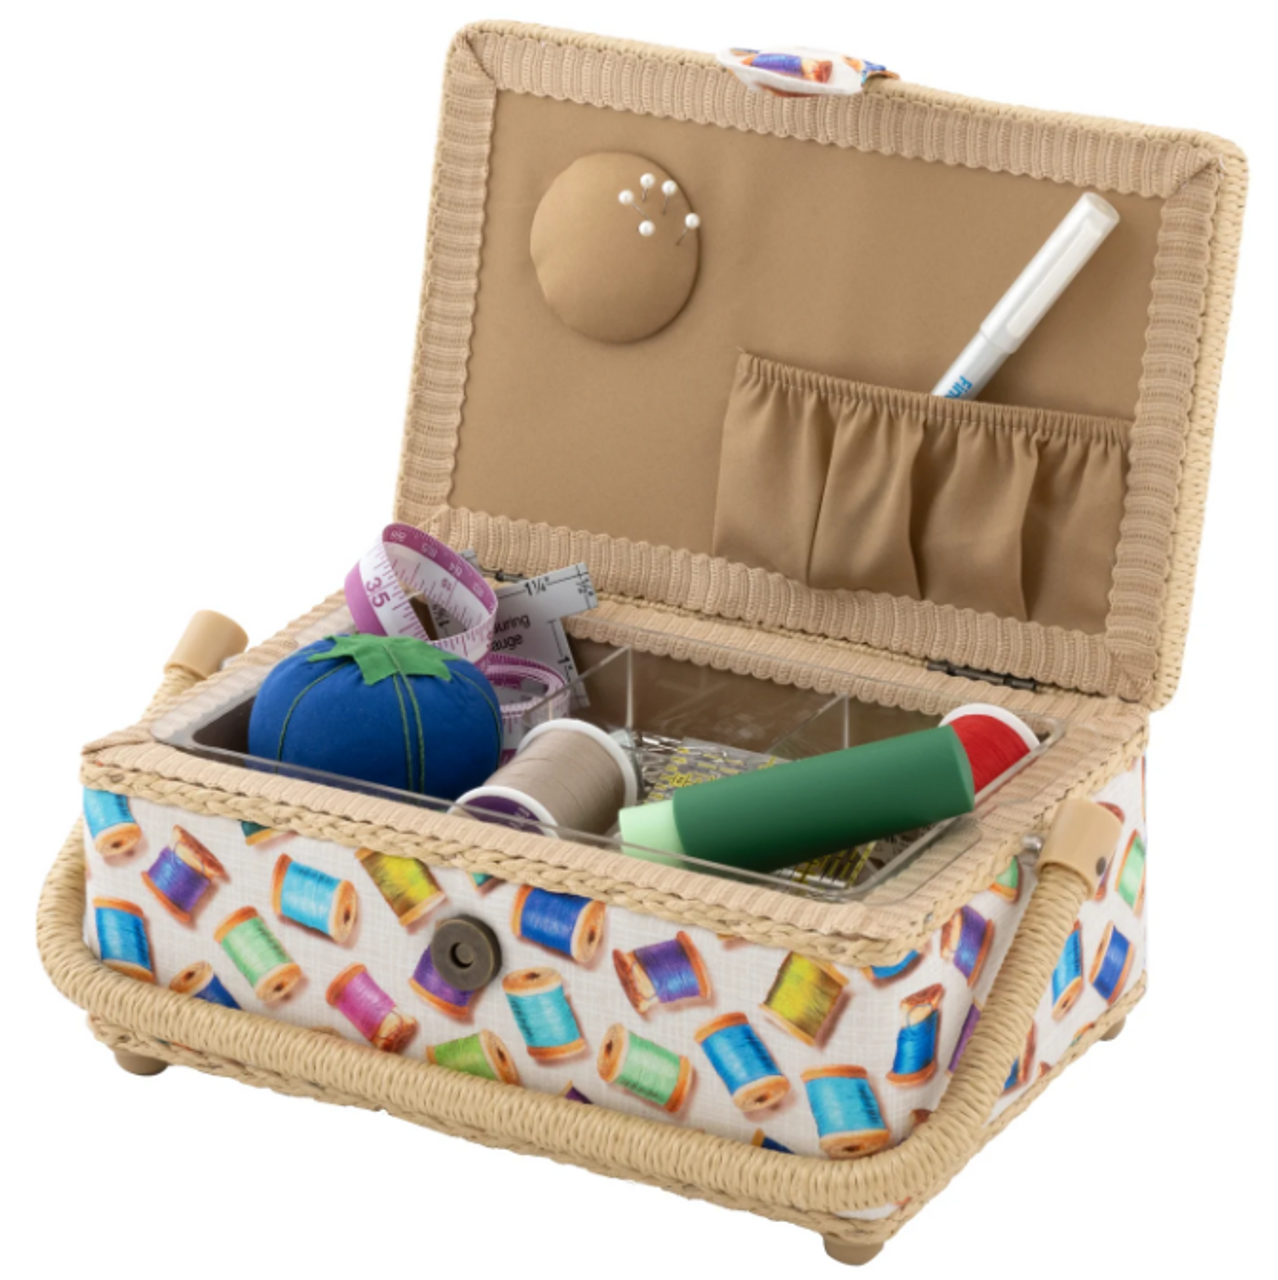 D&D Sewing Basket Kit - Sewing Basket Organizer for Needles, Thread, Tape  Measure, Thimbles and Other Sewing Supplies Storage